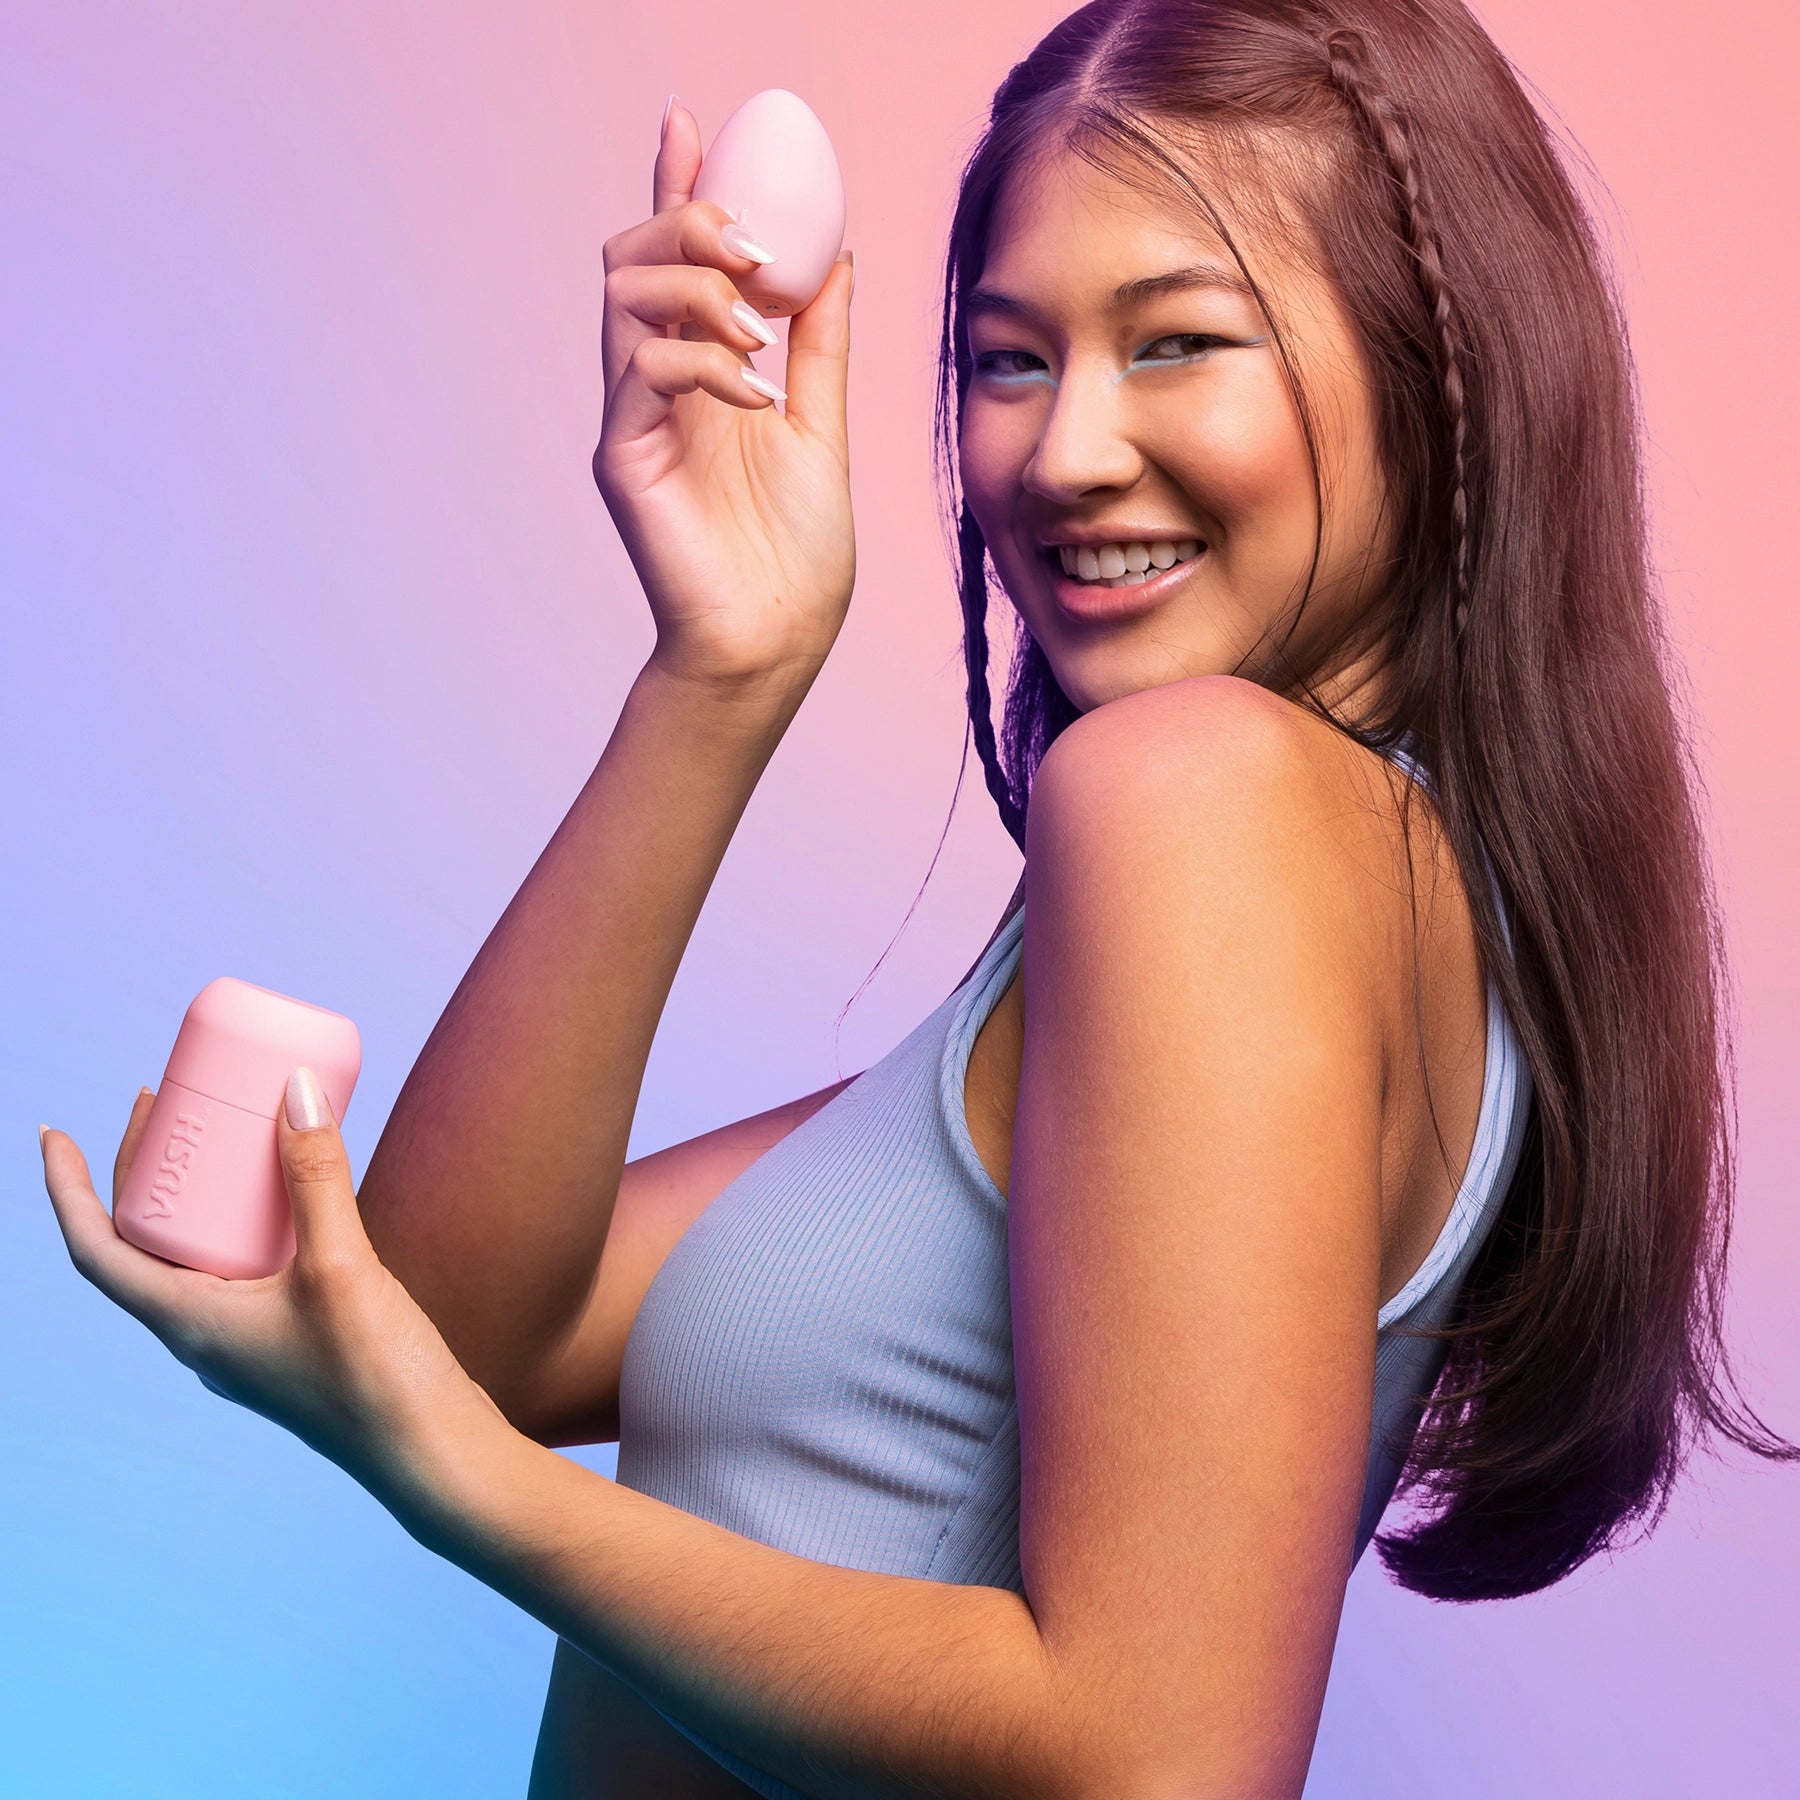 Young woman wearing blue tank top smiling, holding VUSH Plump Palm Vibrator up in right hand and case in left hand.